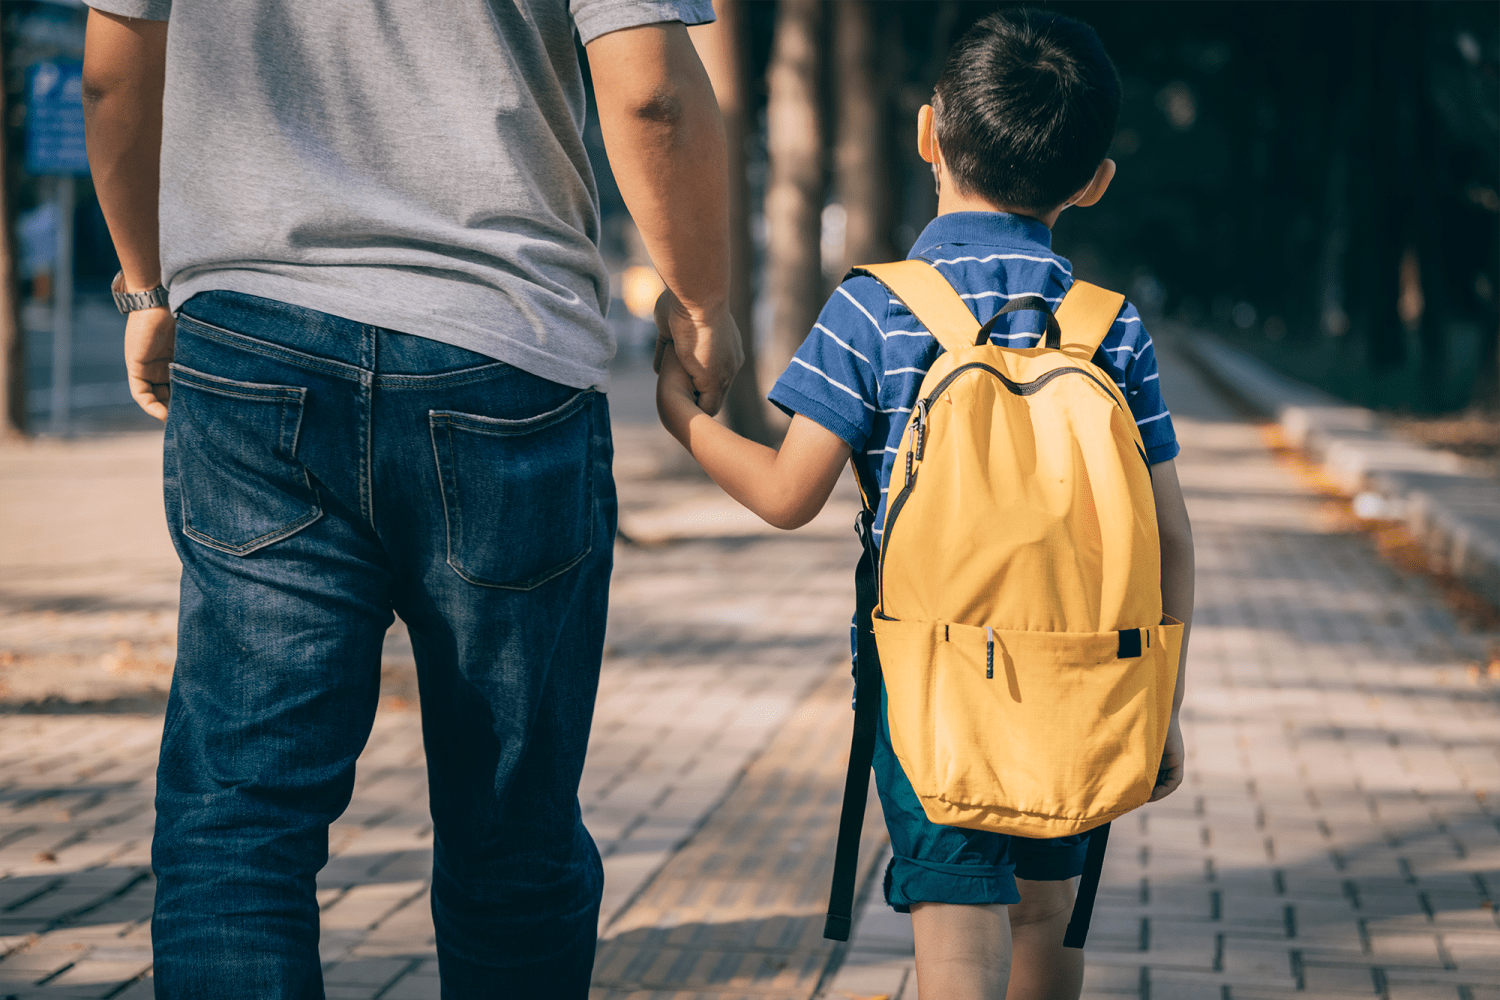 Parent holding hands with a child wearing a yellow backpack